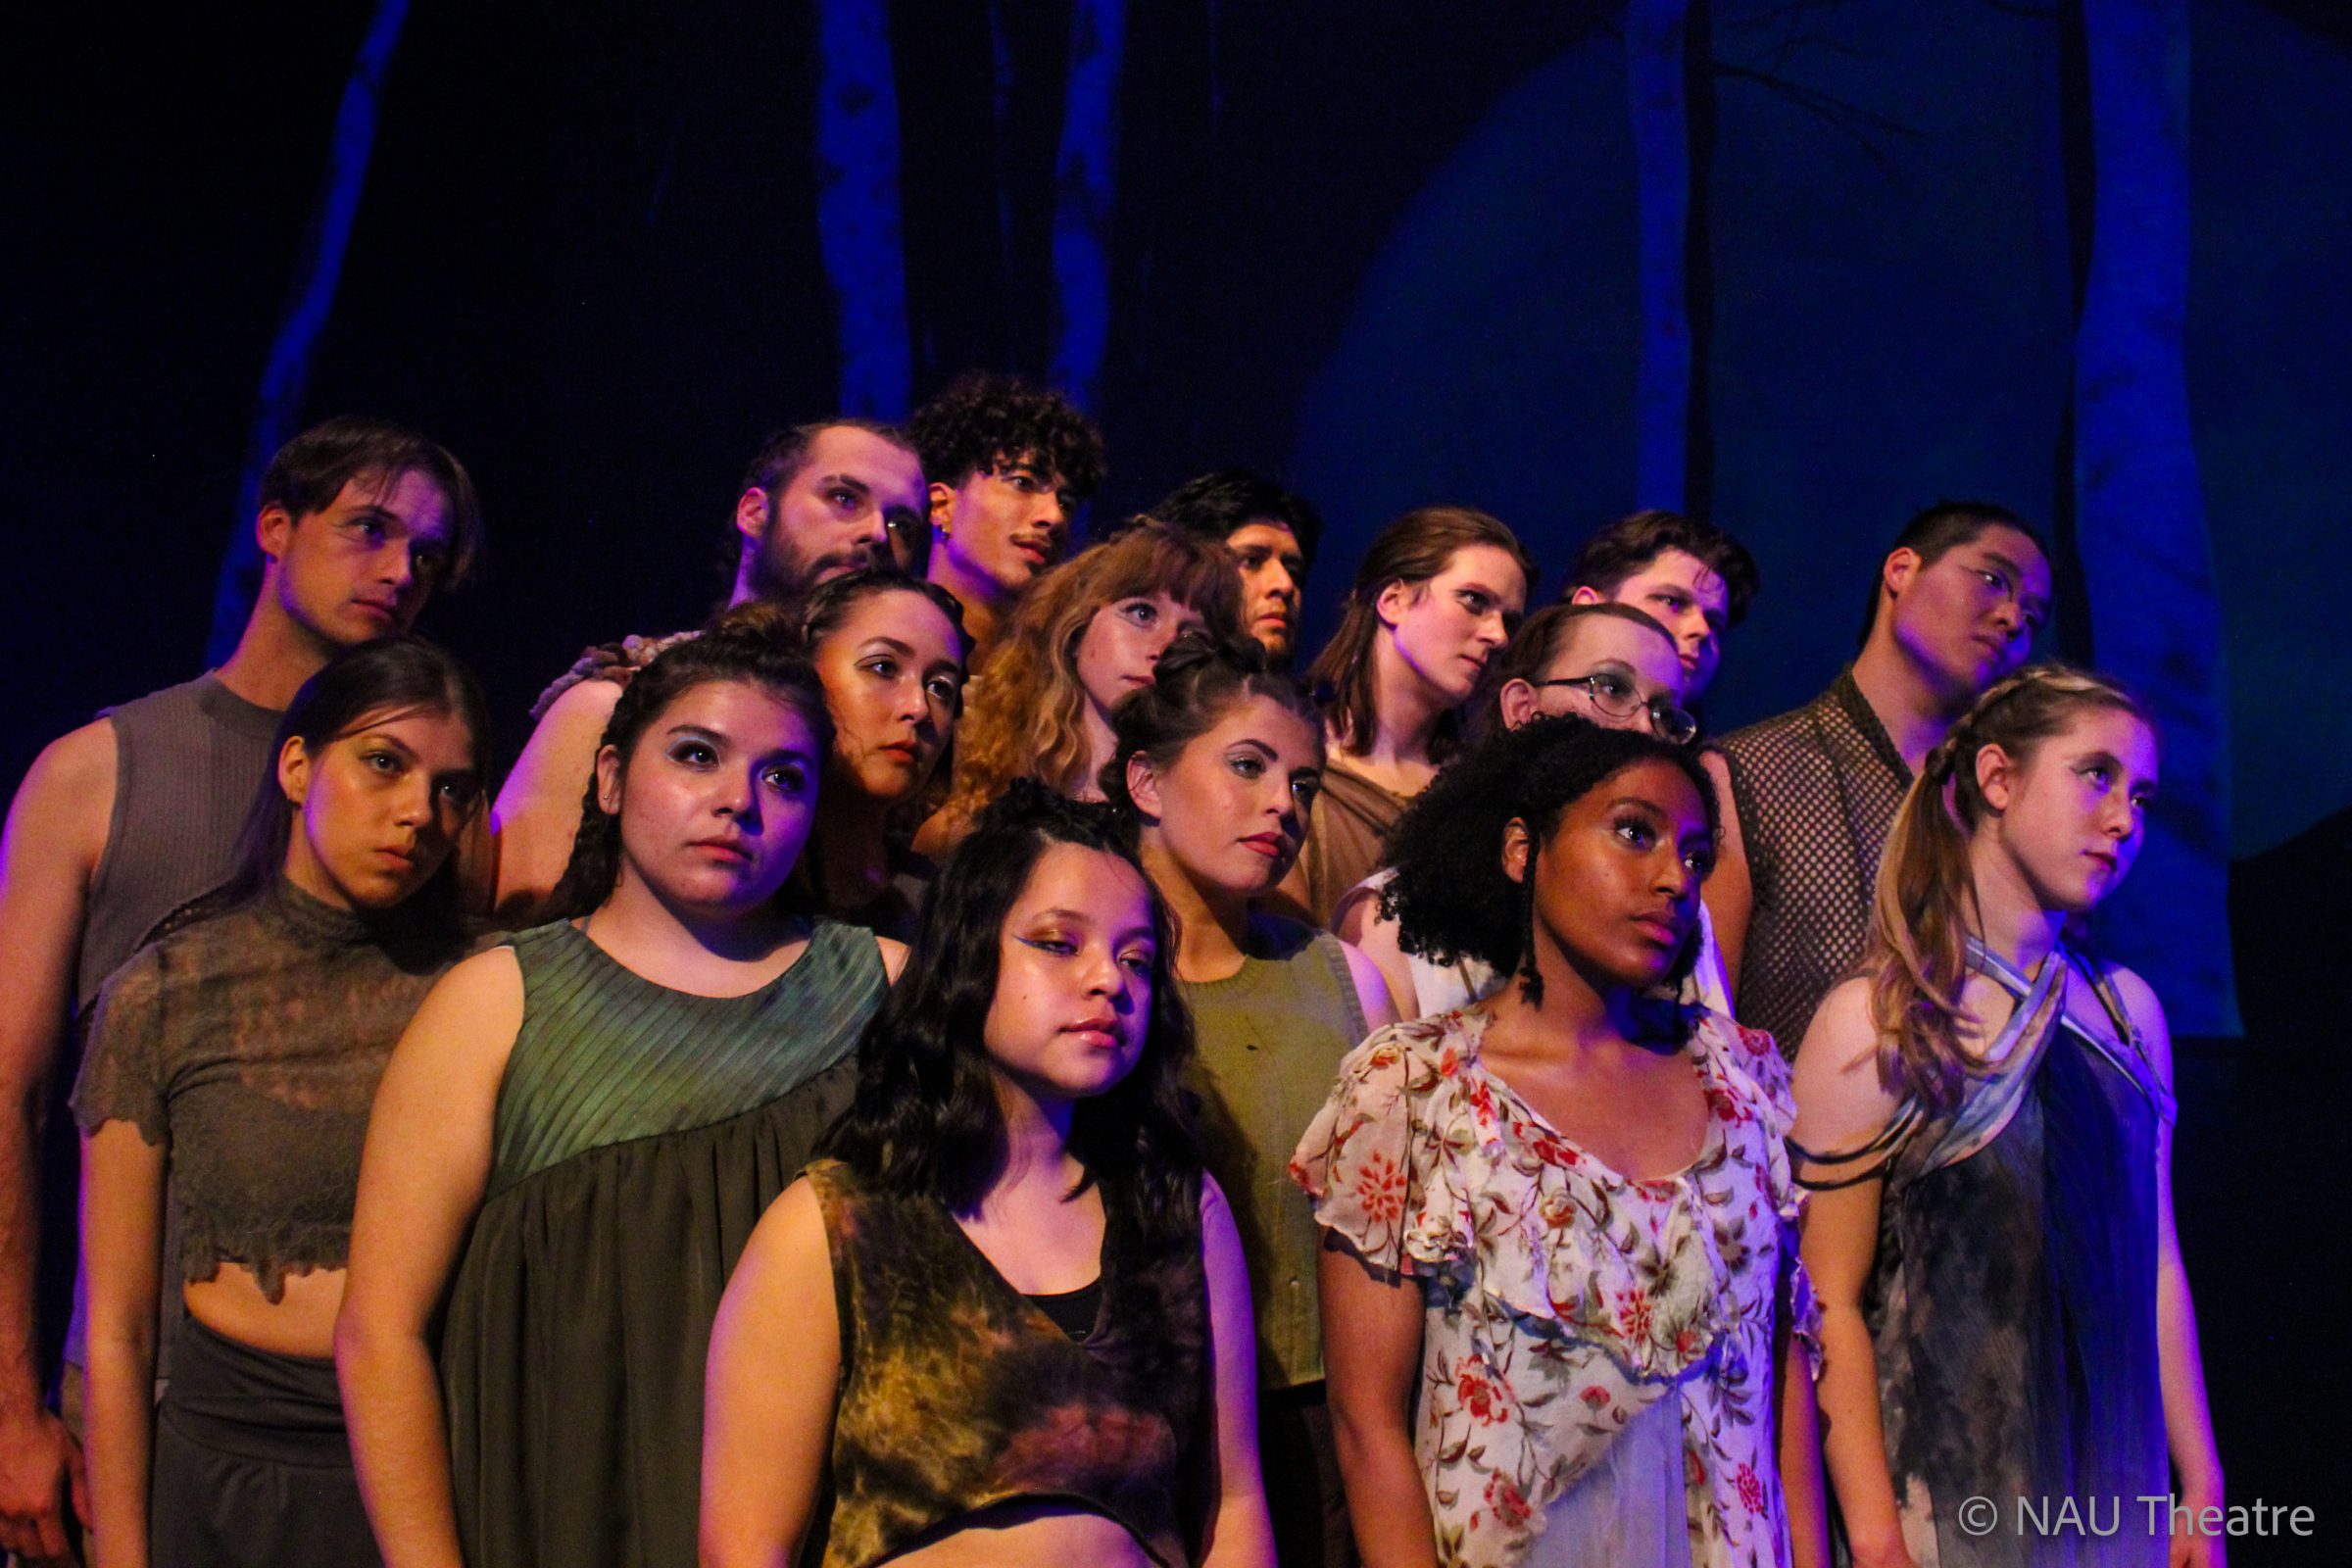 Theater students en masse on stage with dramatic lighting